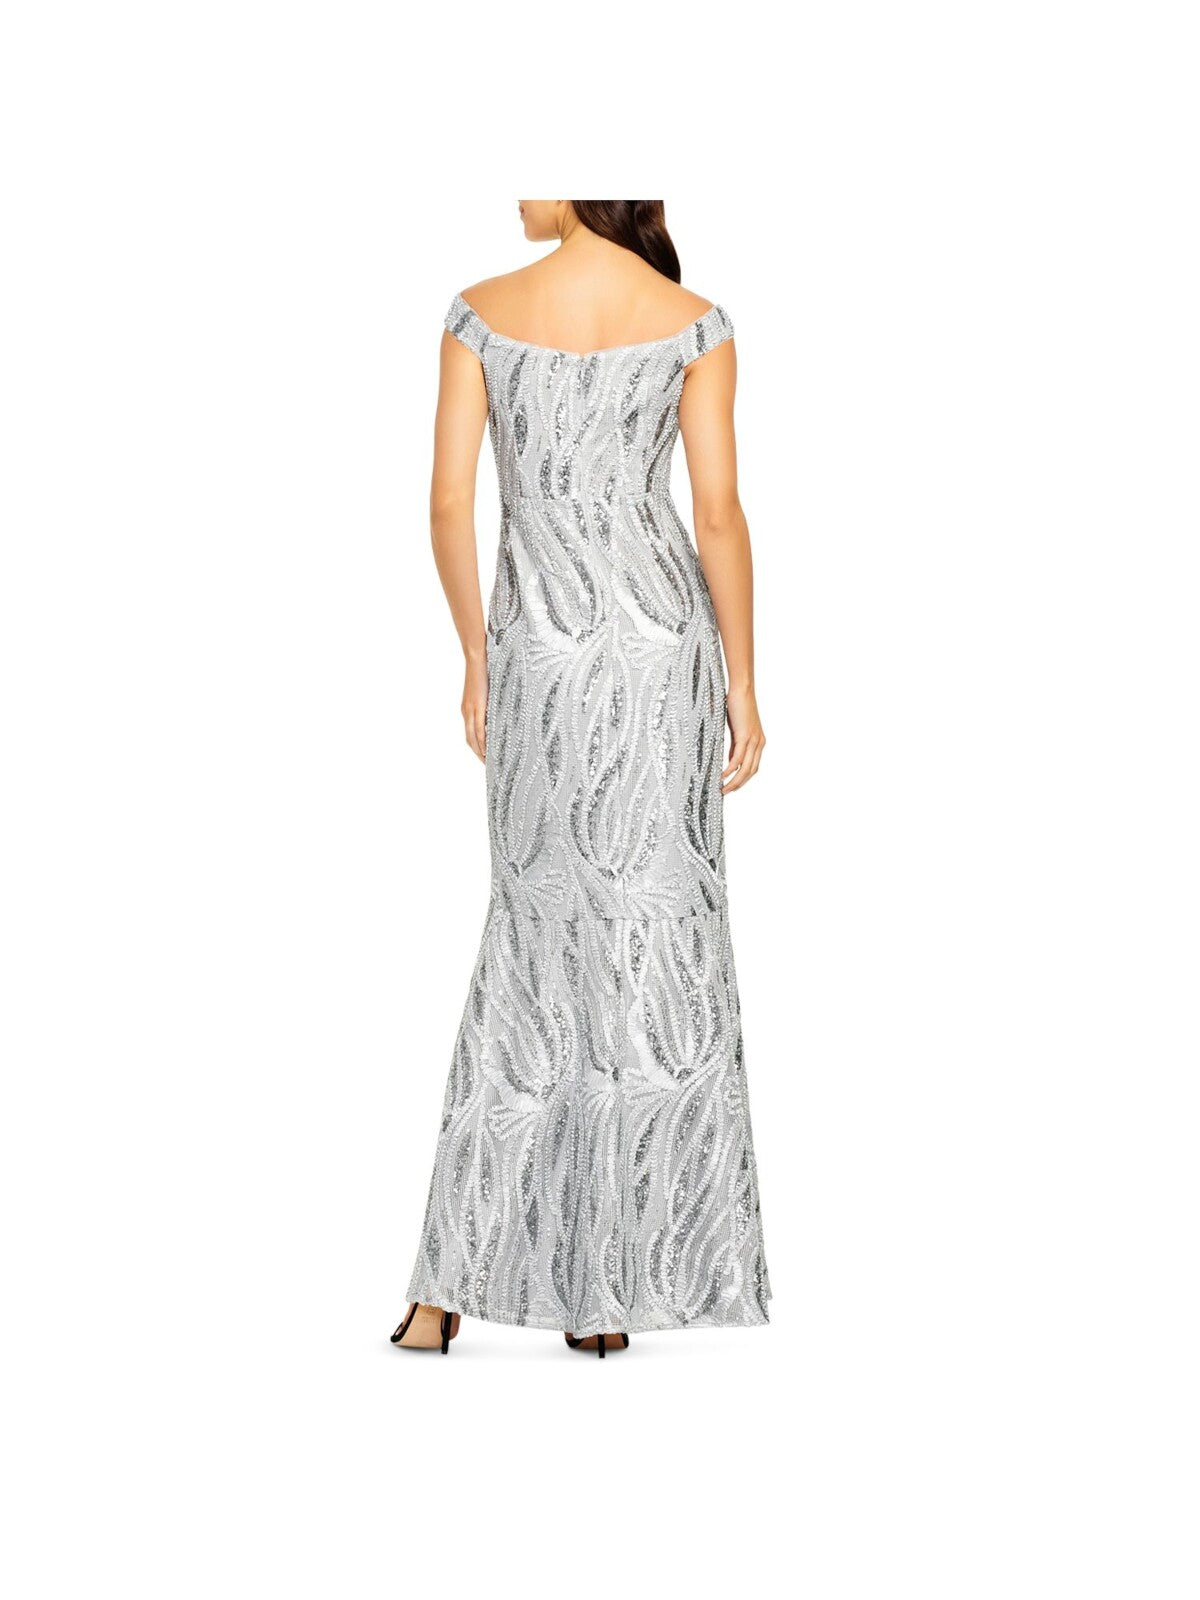 AIDAN MATTOX Womens Silver Sequined Embroidered Trumpet Gown Sleeveless Off Shoulder Maxi Formal Dress 2